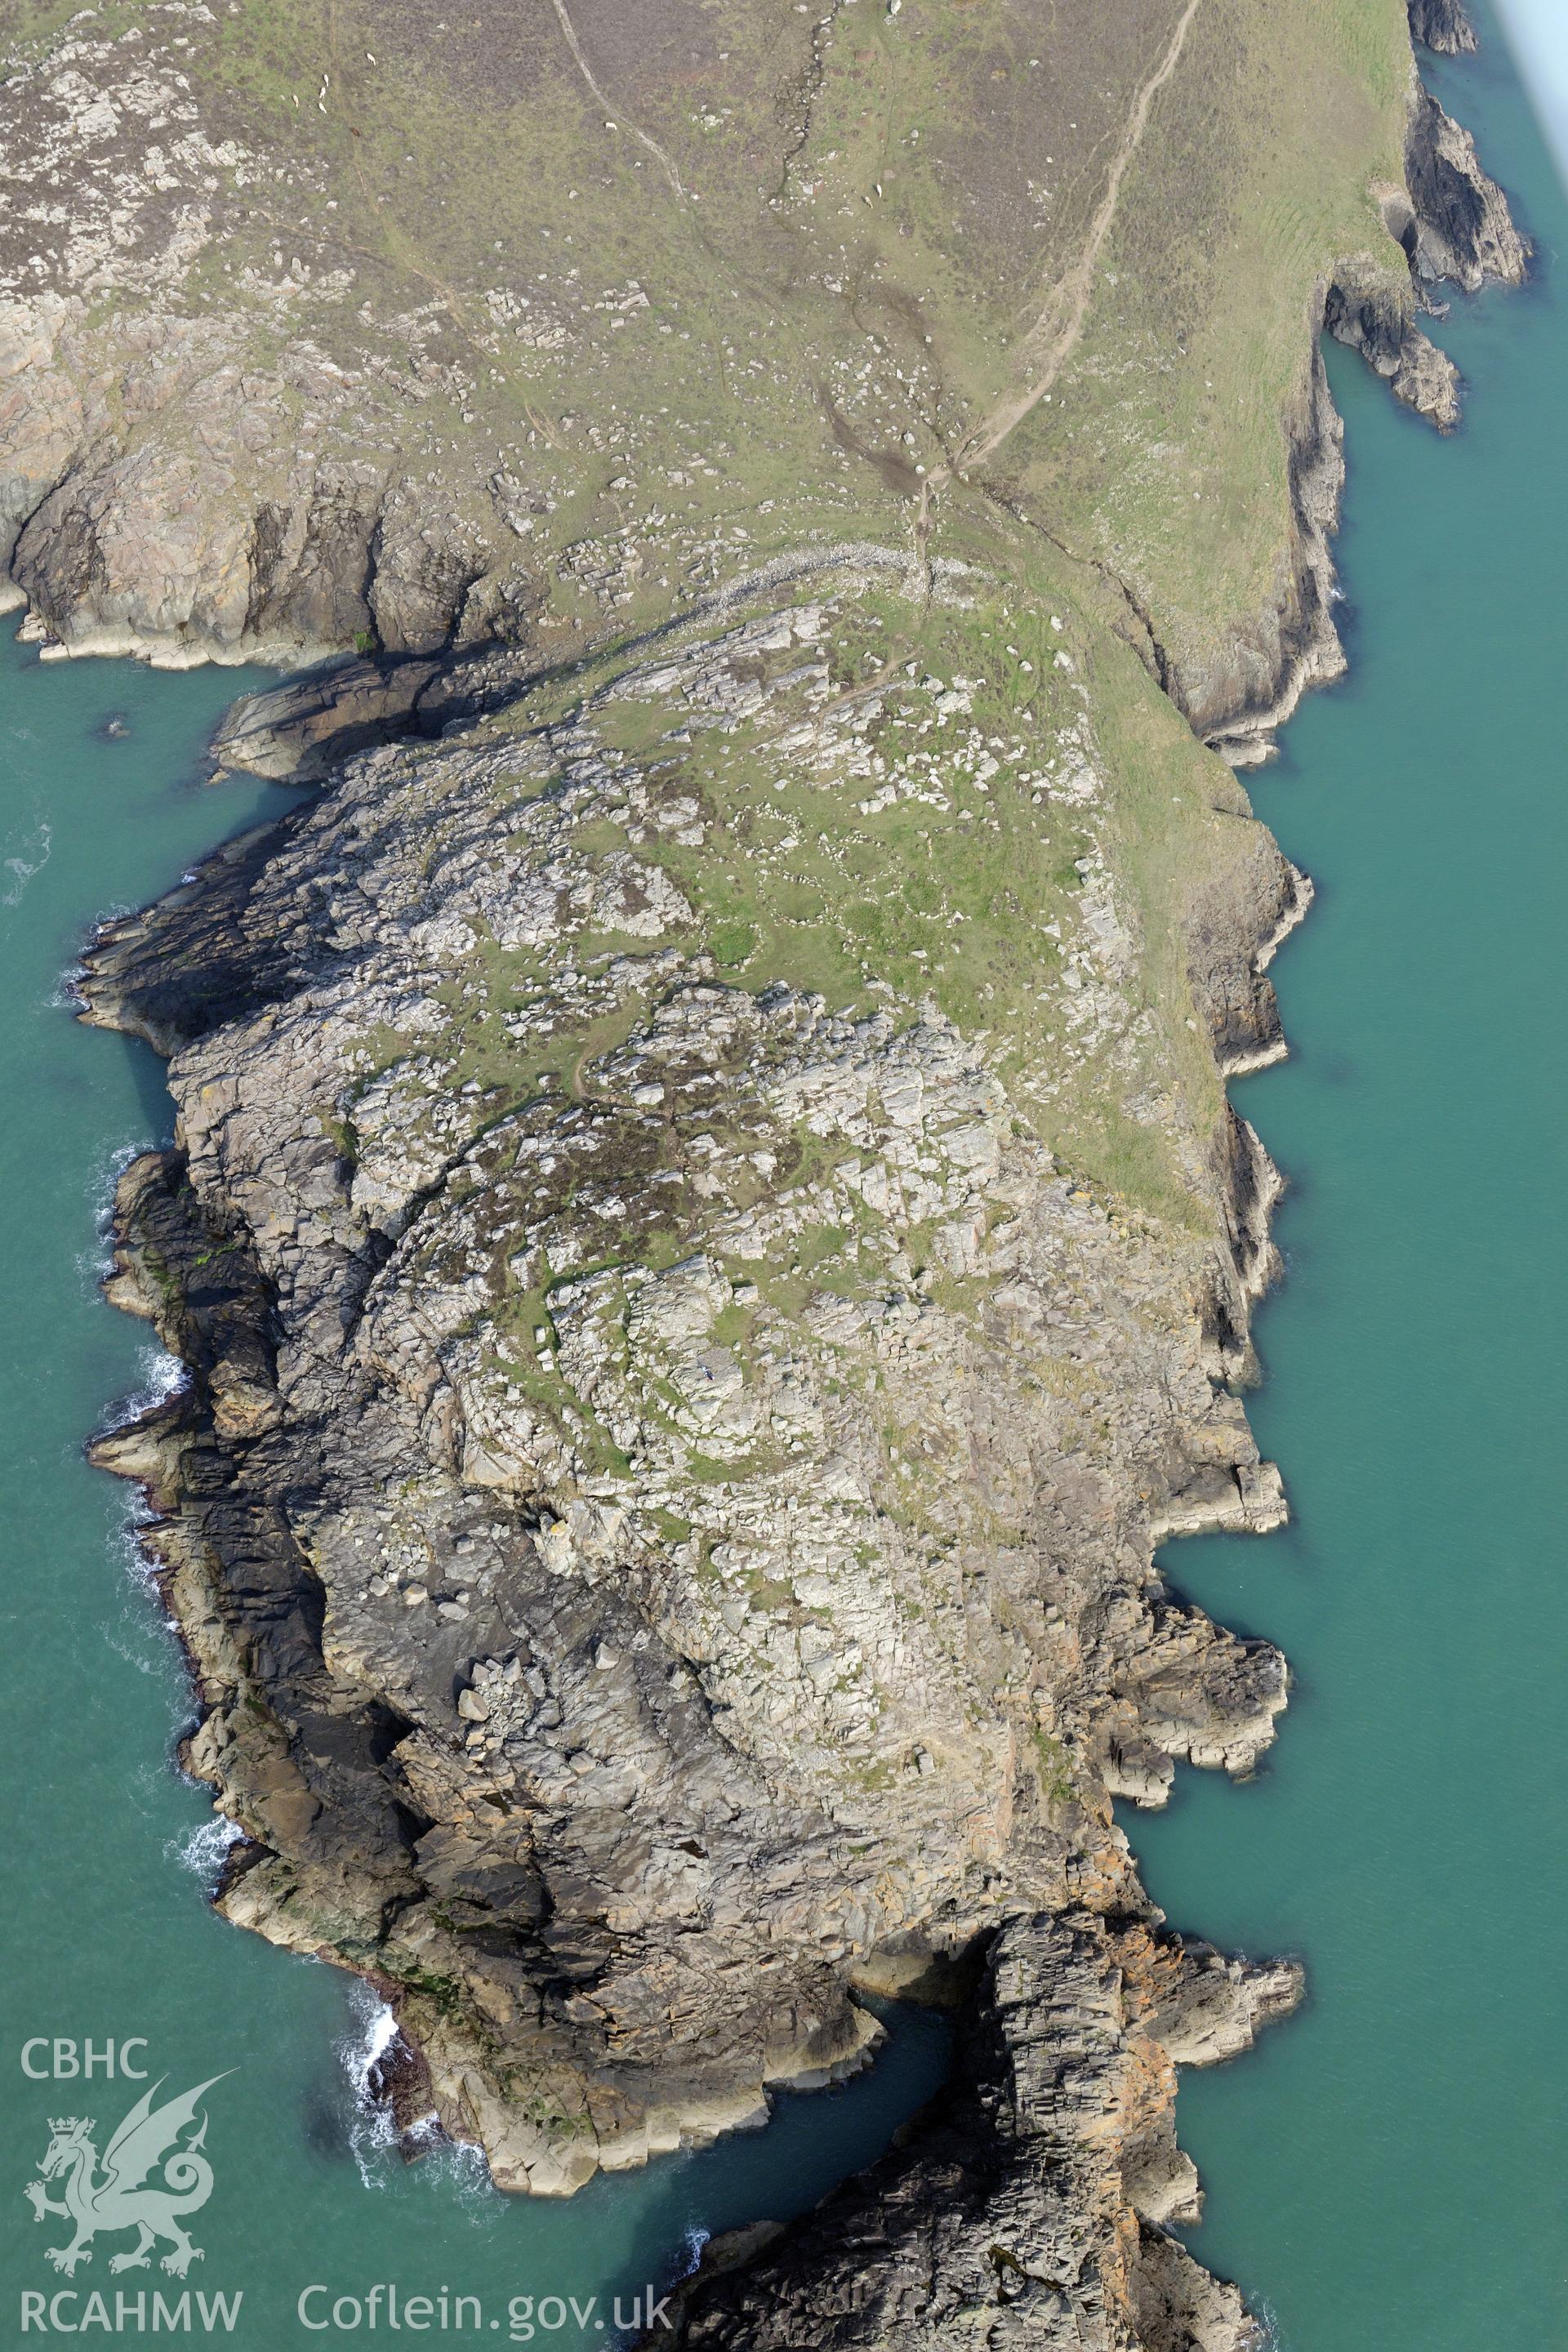 Aerial photography of St Davids Head camp taken on 27th March 2017. Baseline aerial reconnaissance survey for the CHERISH Project. ? Crown: CHERISH PROJECT 2019. Produced with EU funds through the Ireland Wales Co-operation Programme 2014-2020. All material made freely available through the Open Government Licence.